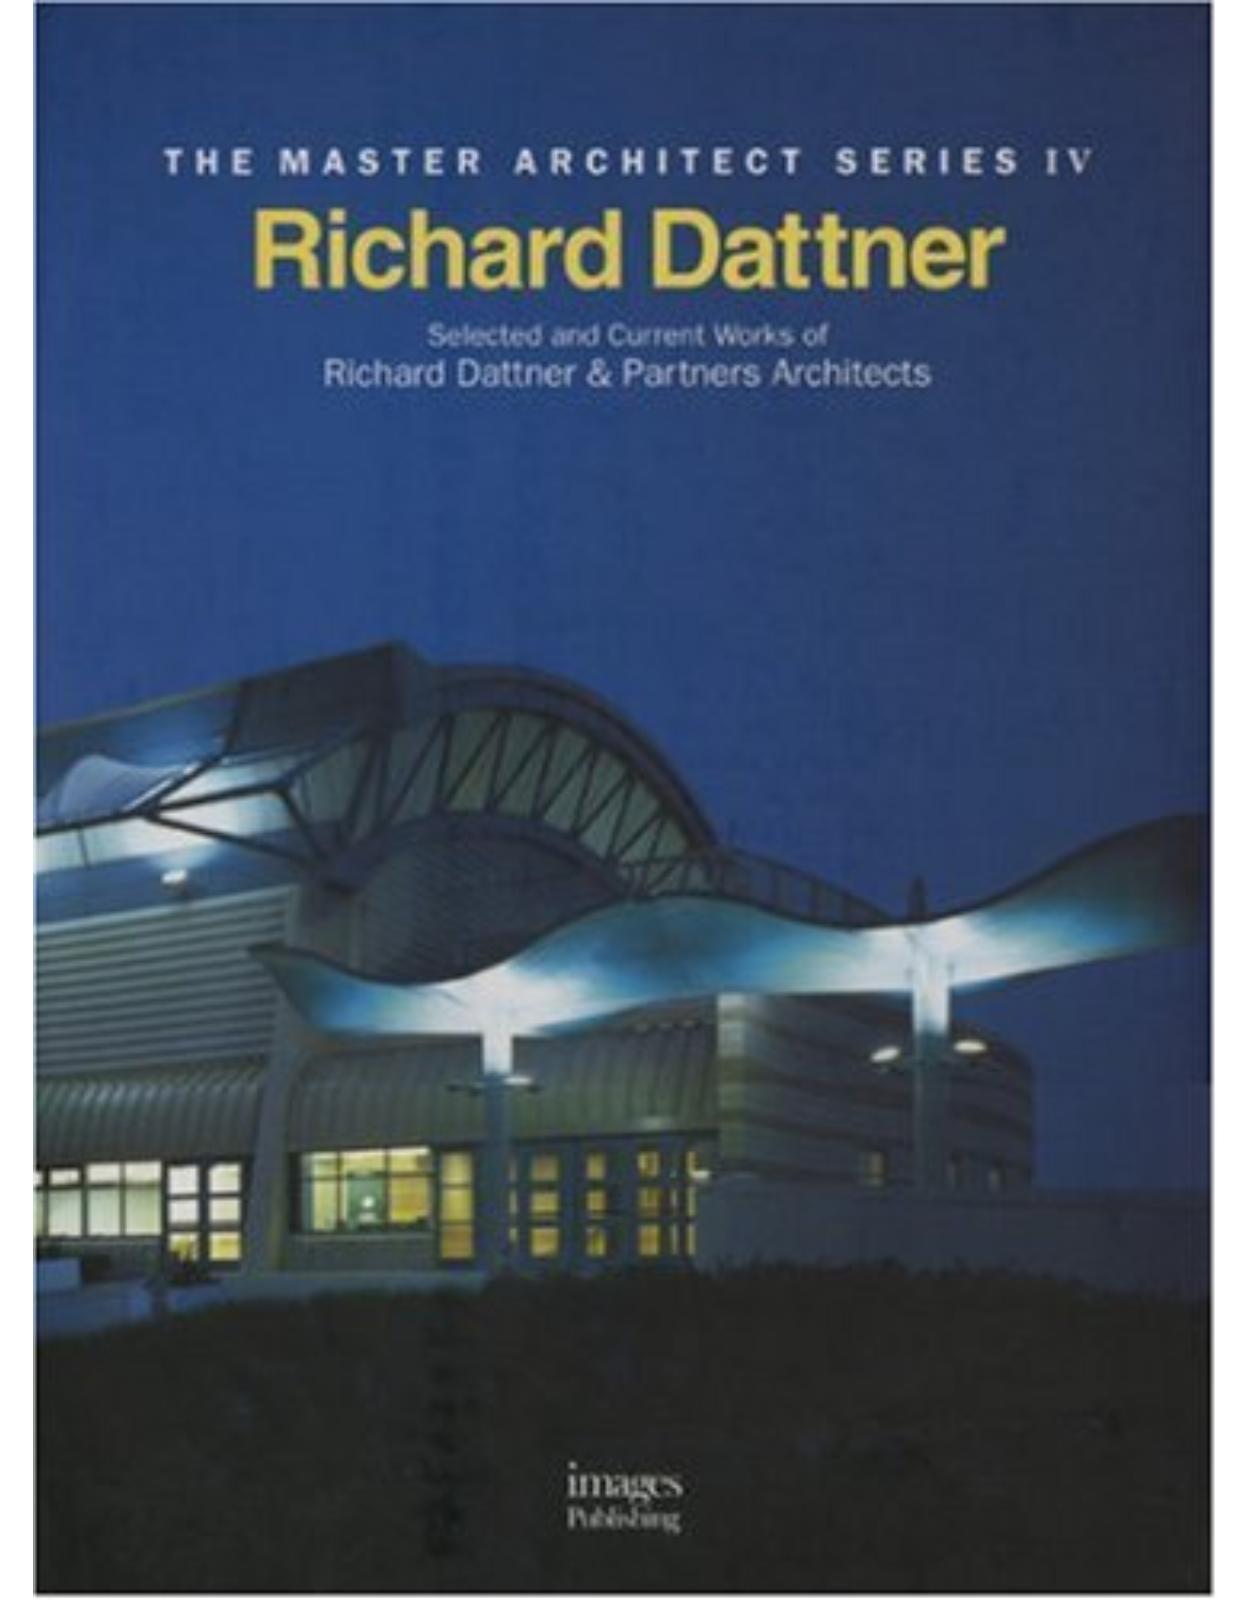 Richard Dattner: Selected and Current Works of Richard Dattner & Partners Architects (Master Architect Series IV)